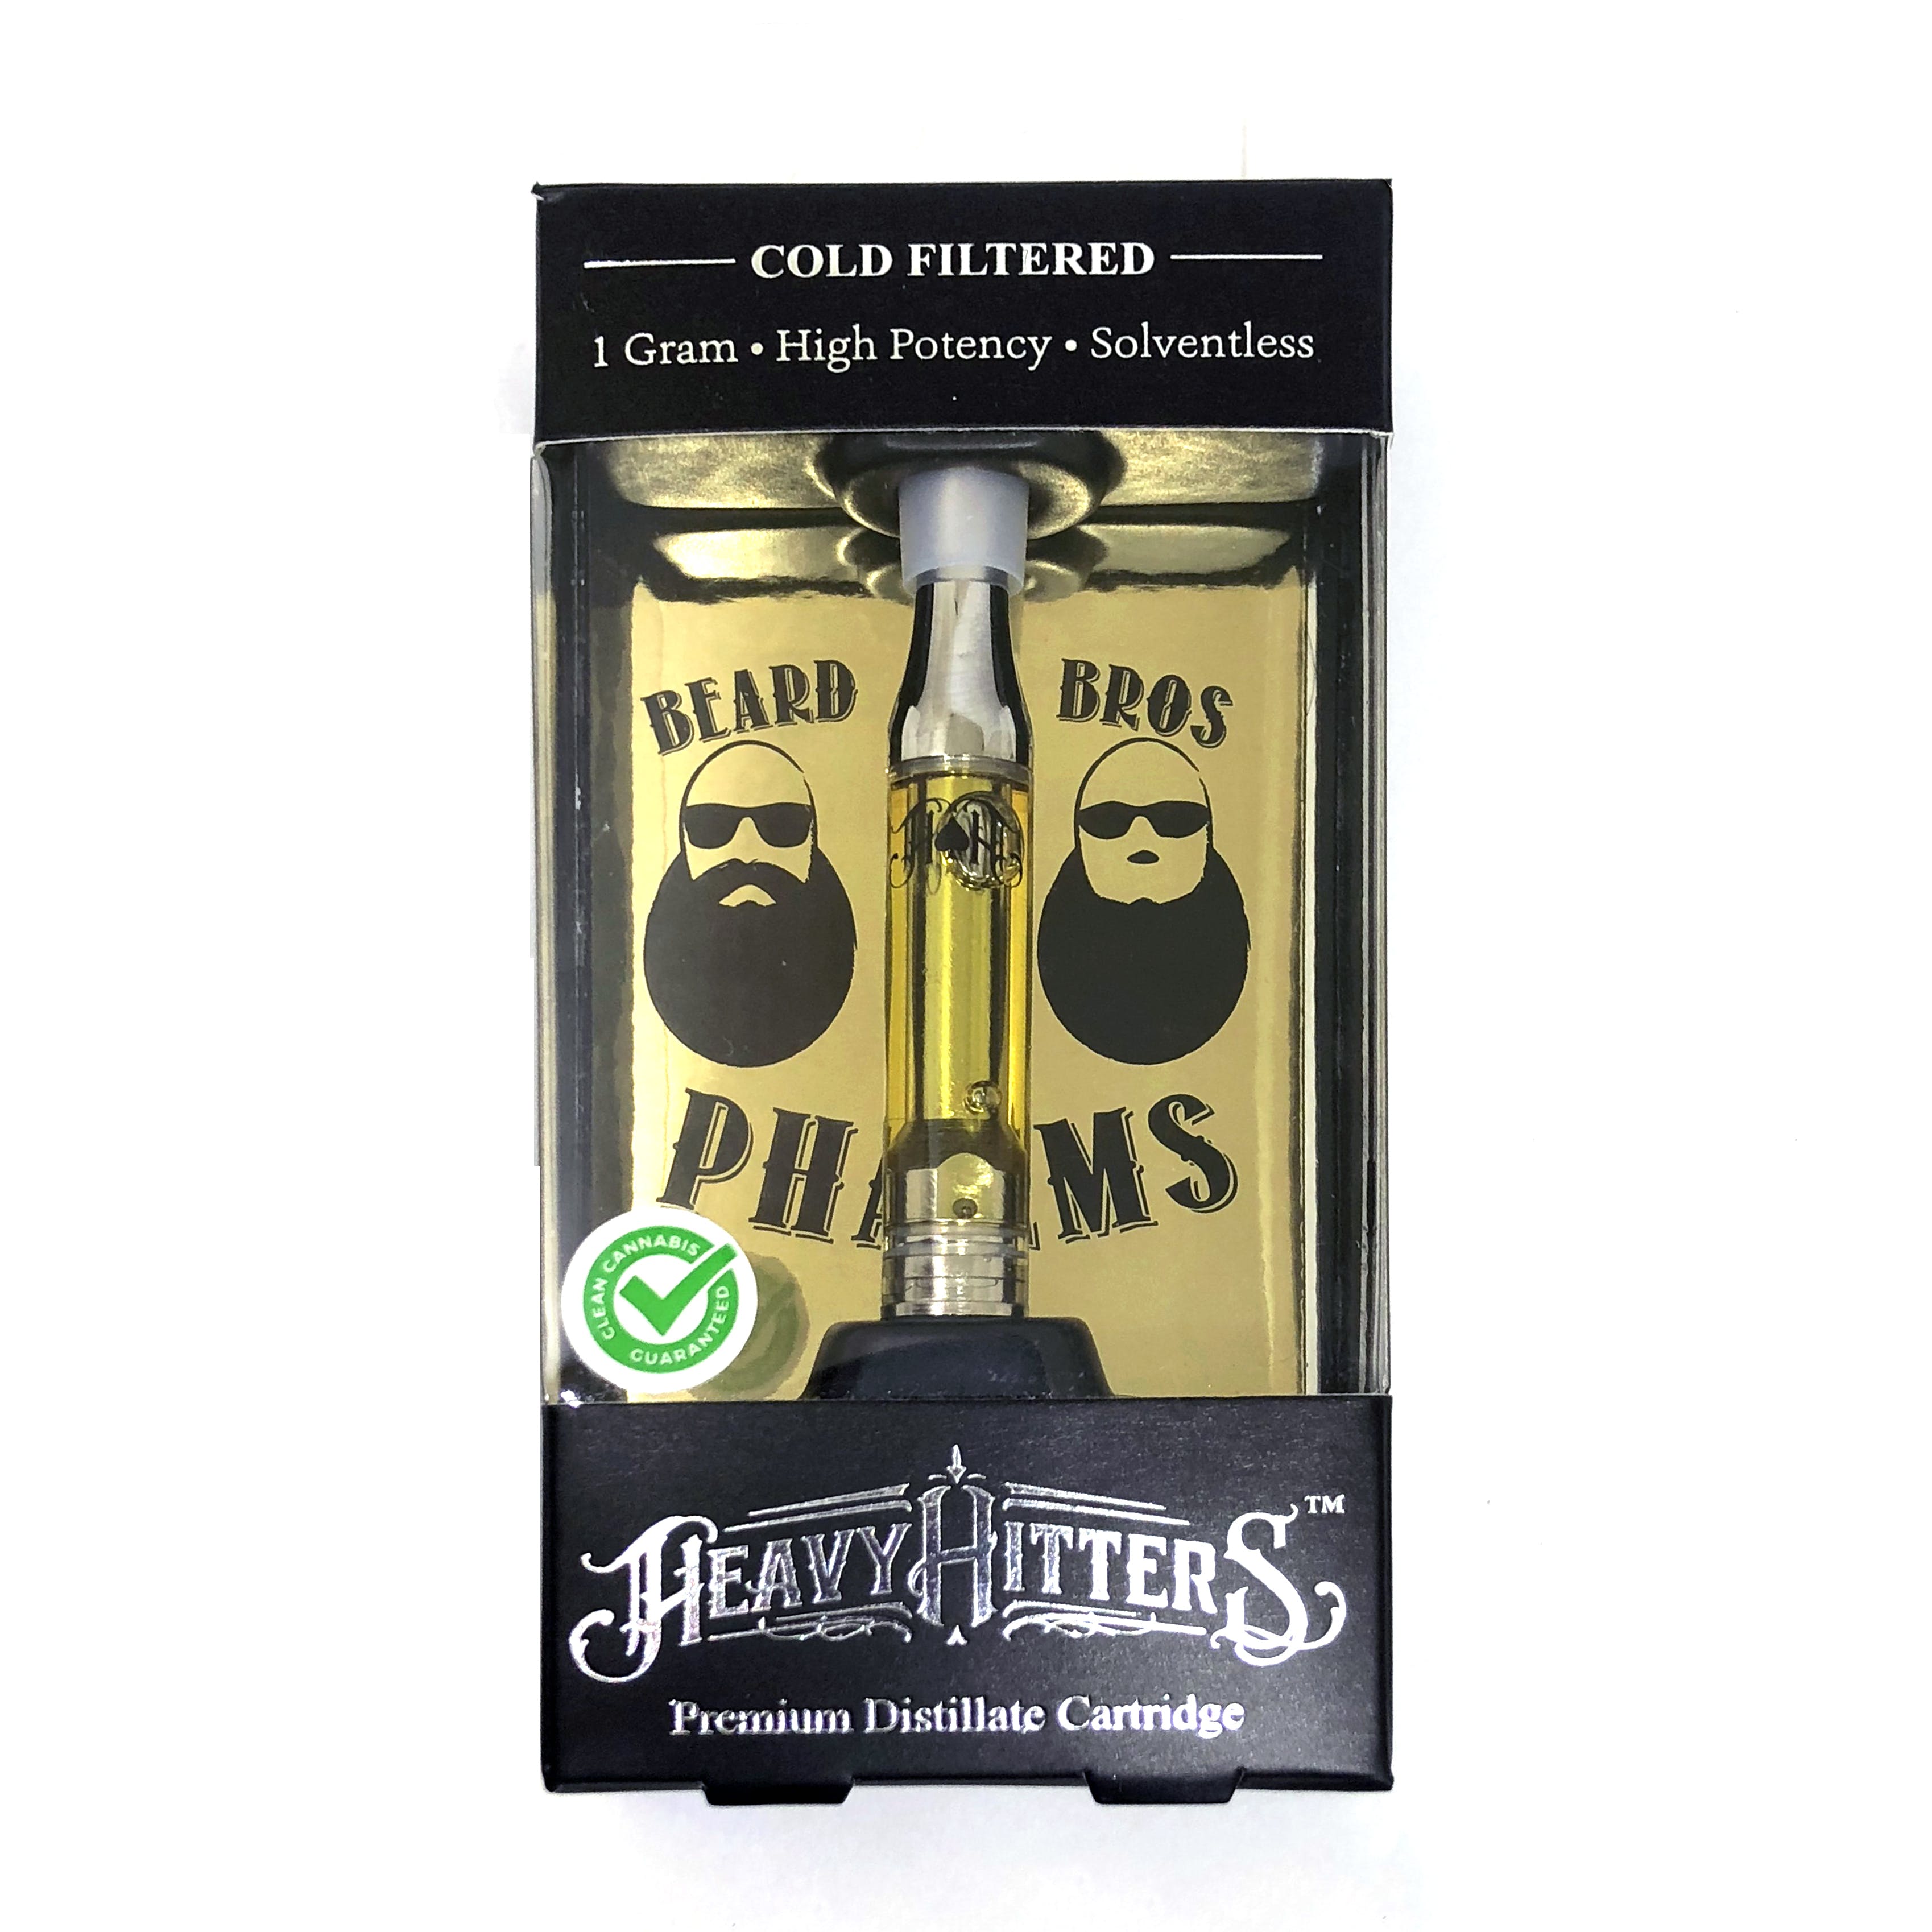 marijuana-dispensaries-herb-garden-collective-downtown-la-in-los-angeles-extreme-cream-a-c2-80-c2-93-hh-x-beard-brothers-a-c2-80-c2-93an1g-cartridge